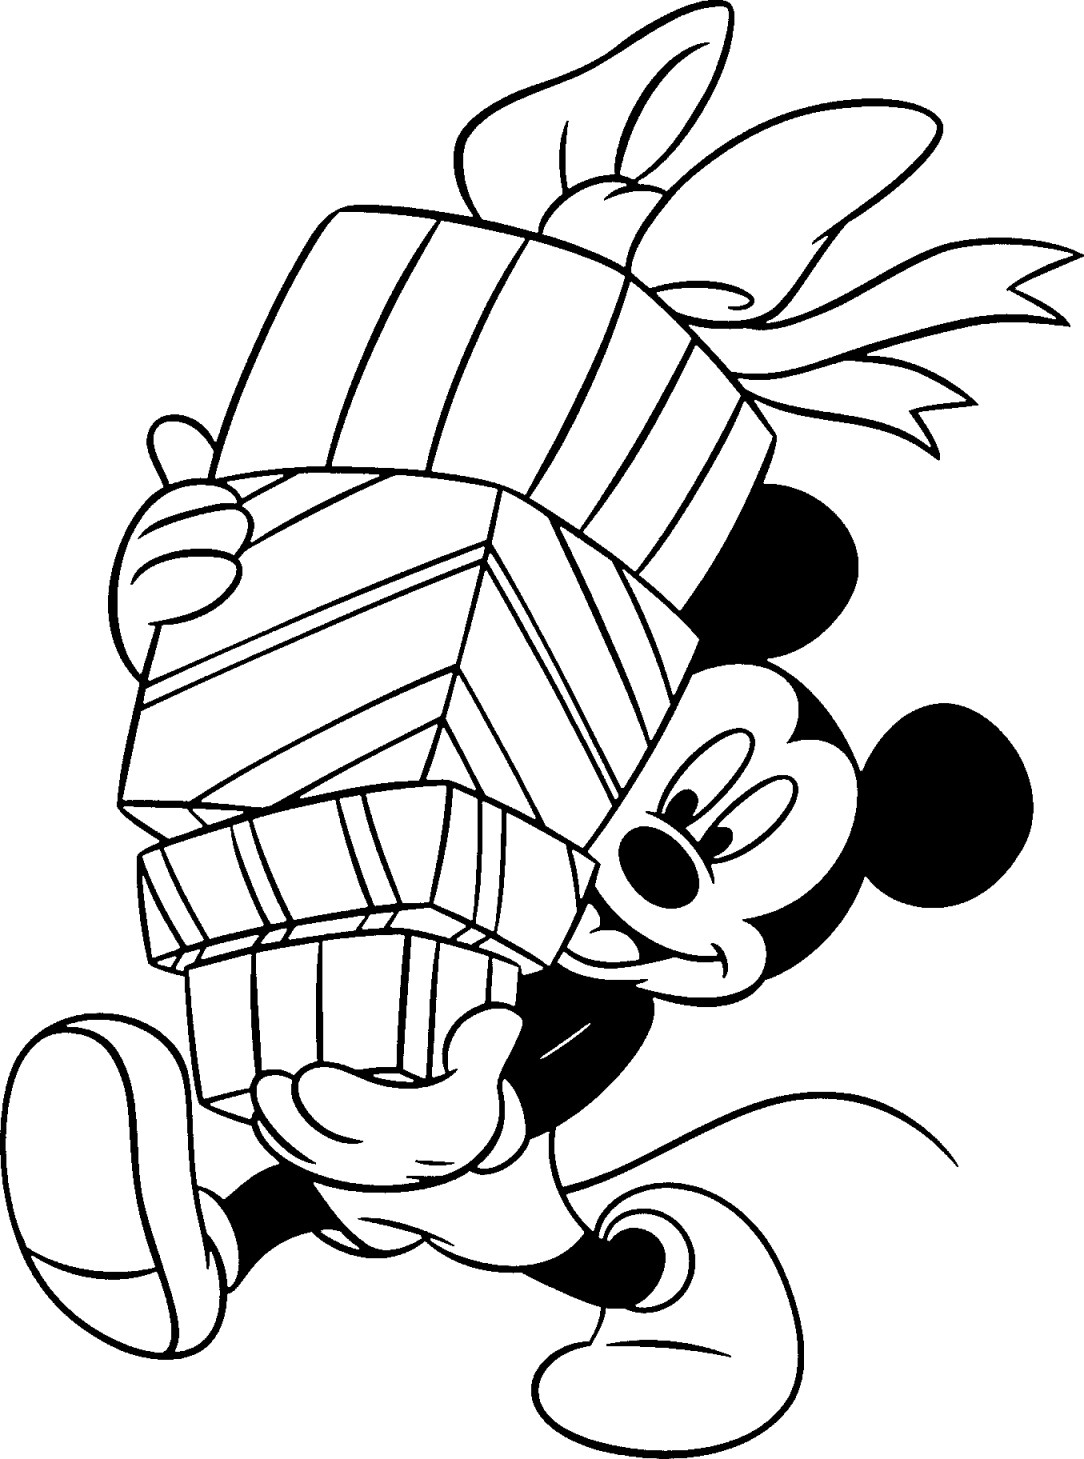 Coloring Pages Printable Disney
 Coloring Pages Christmas Disney Disney Coloring Pages